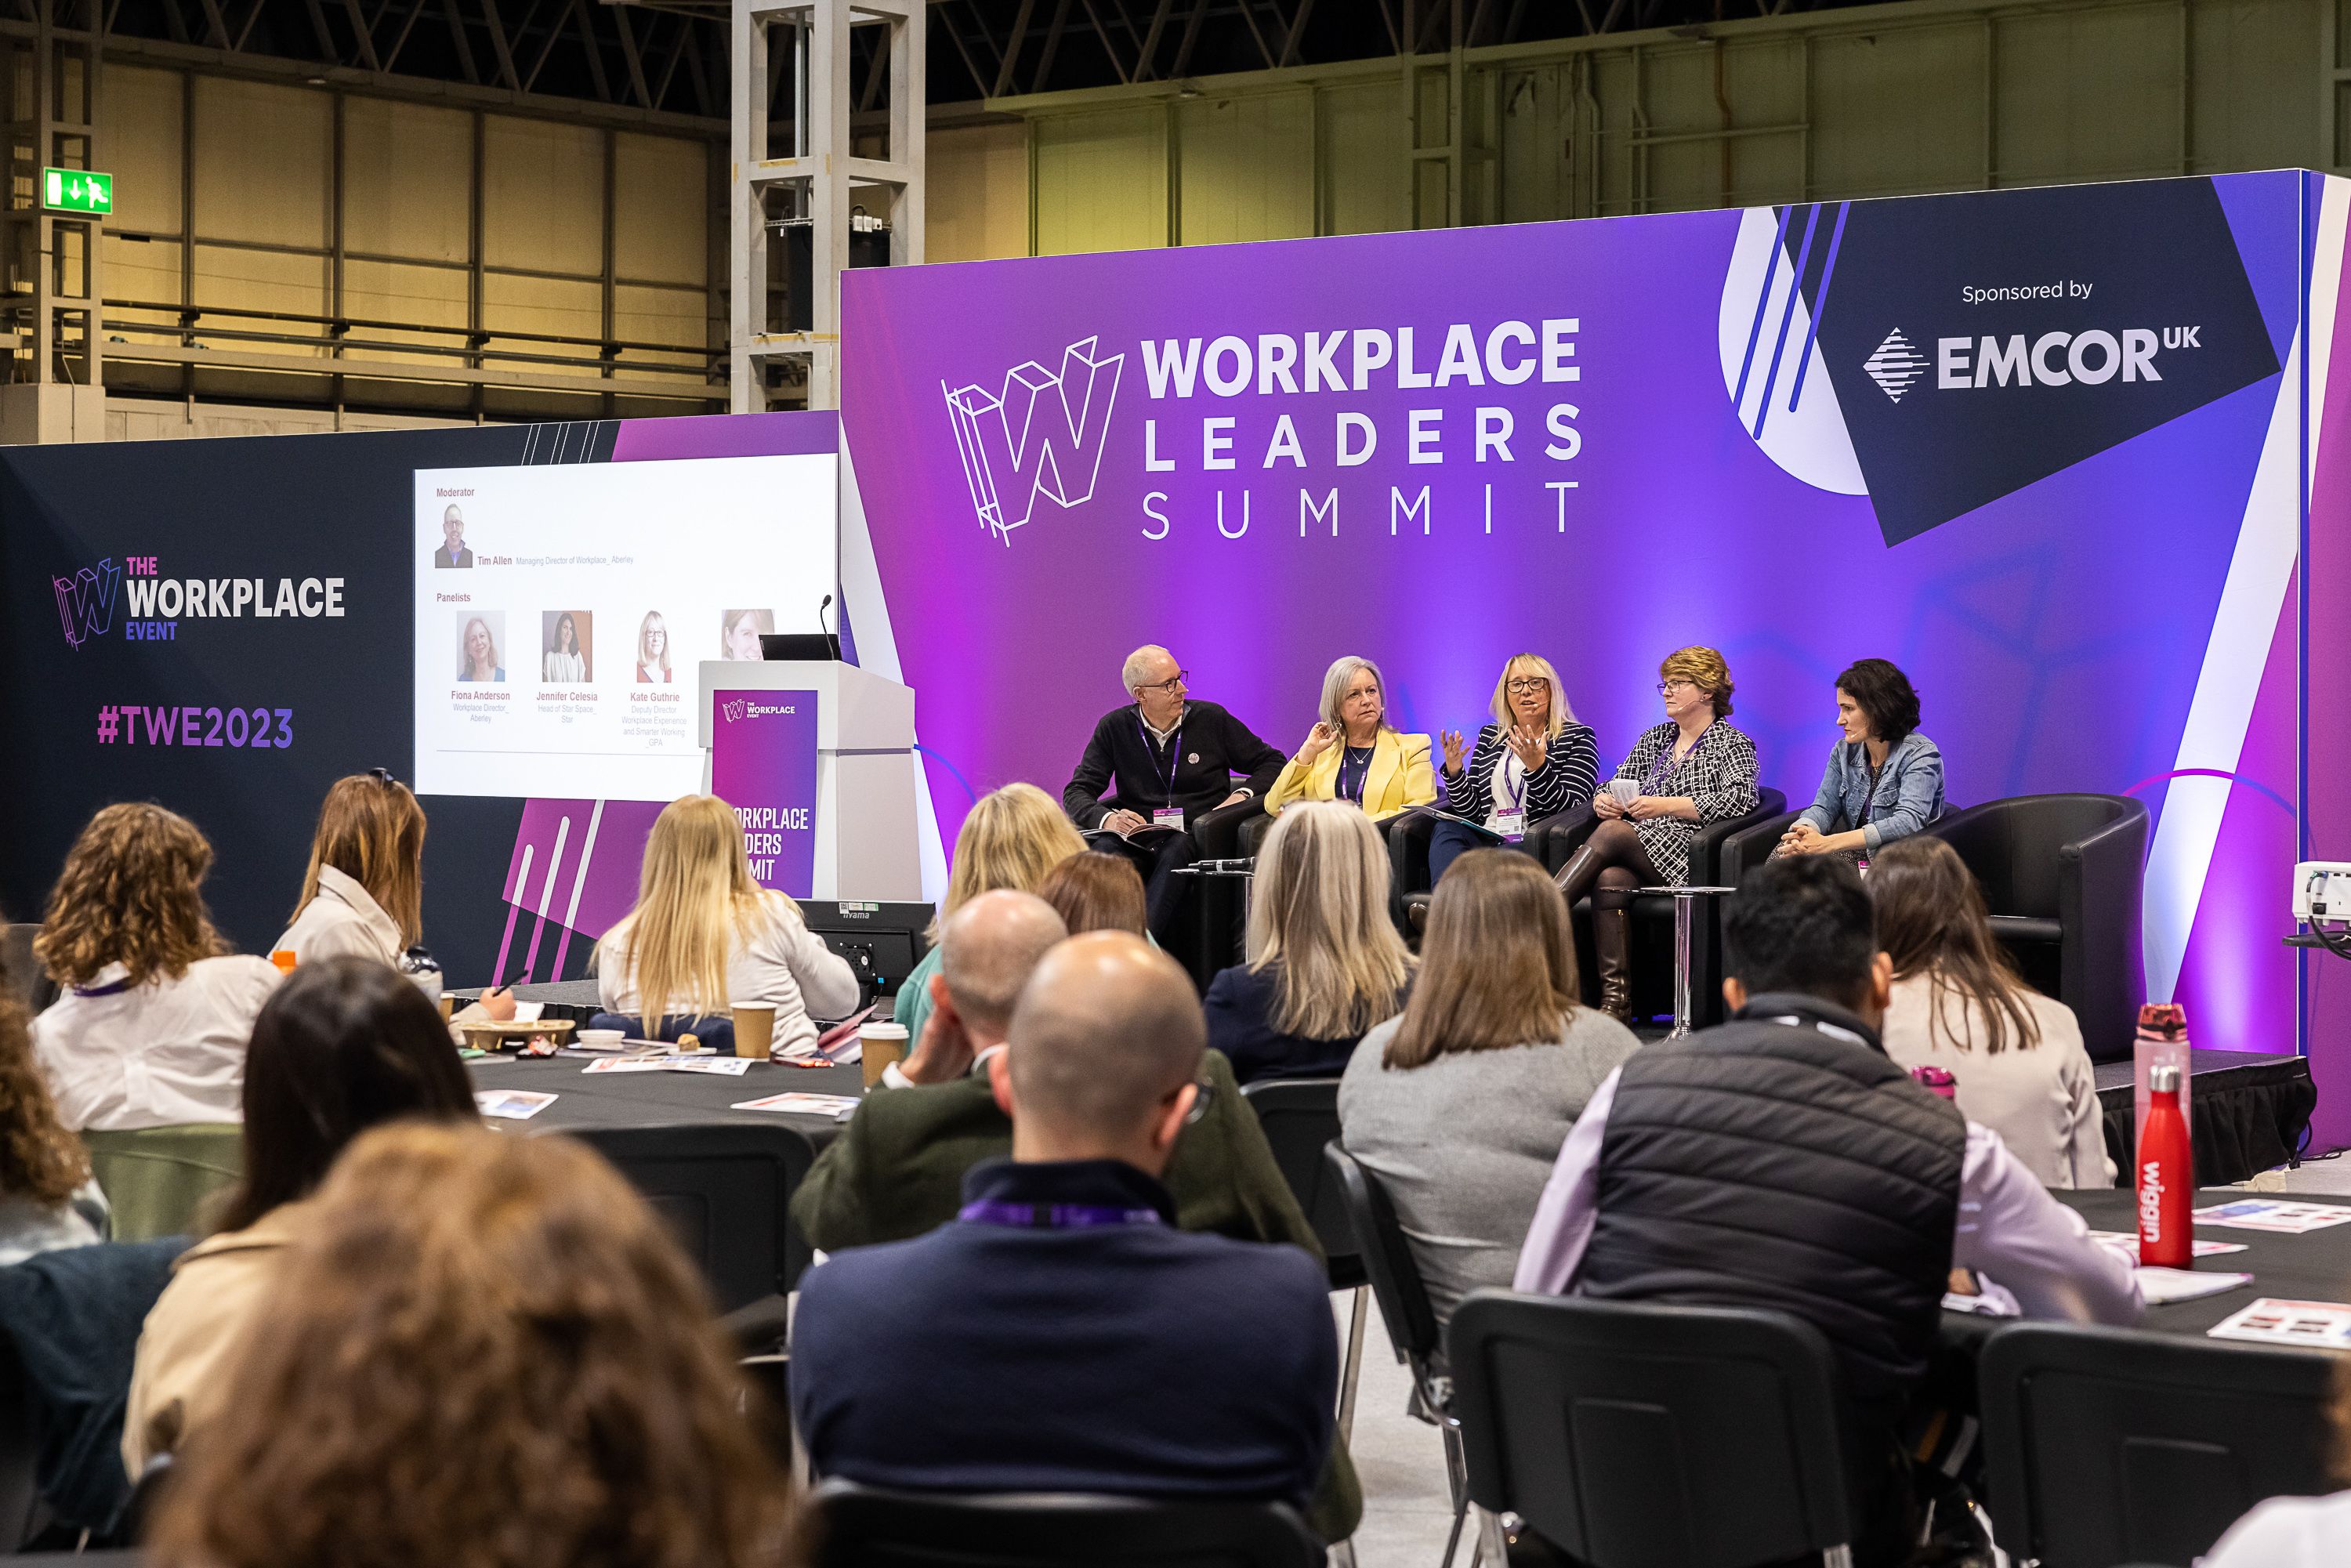 The Workplace Leaders Summit